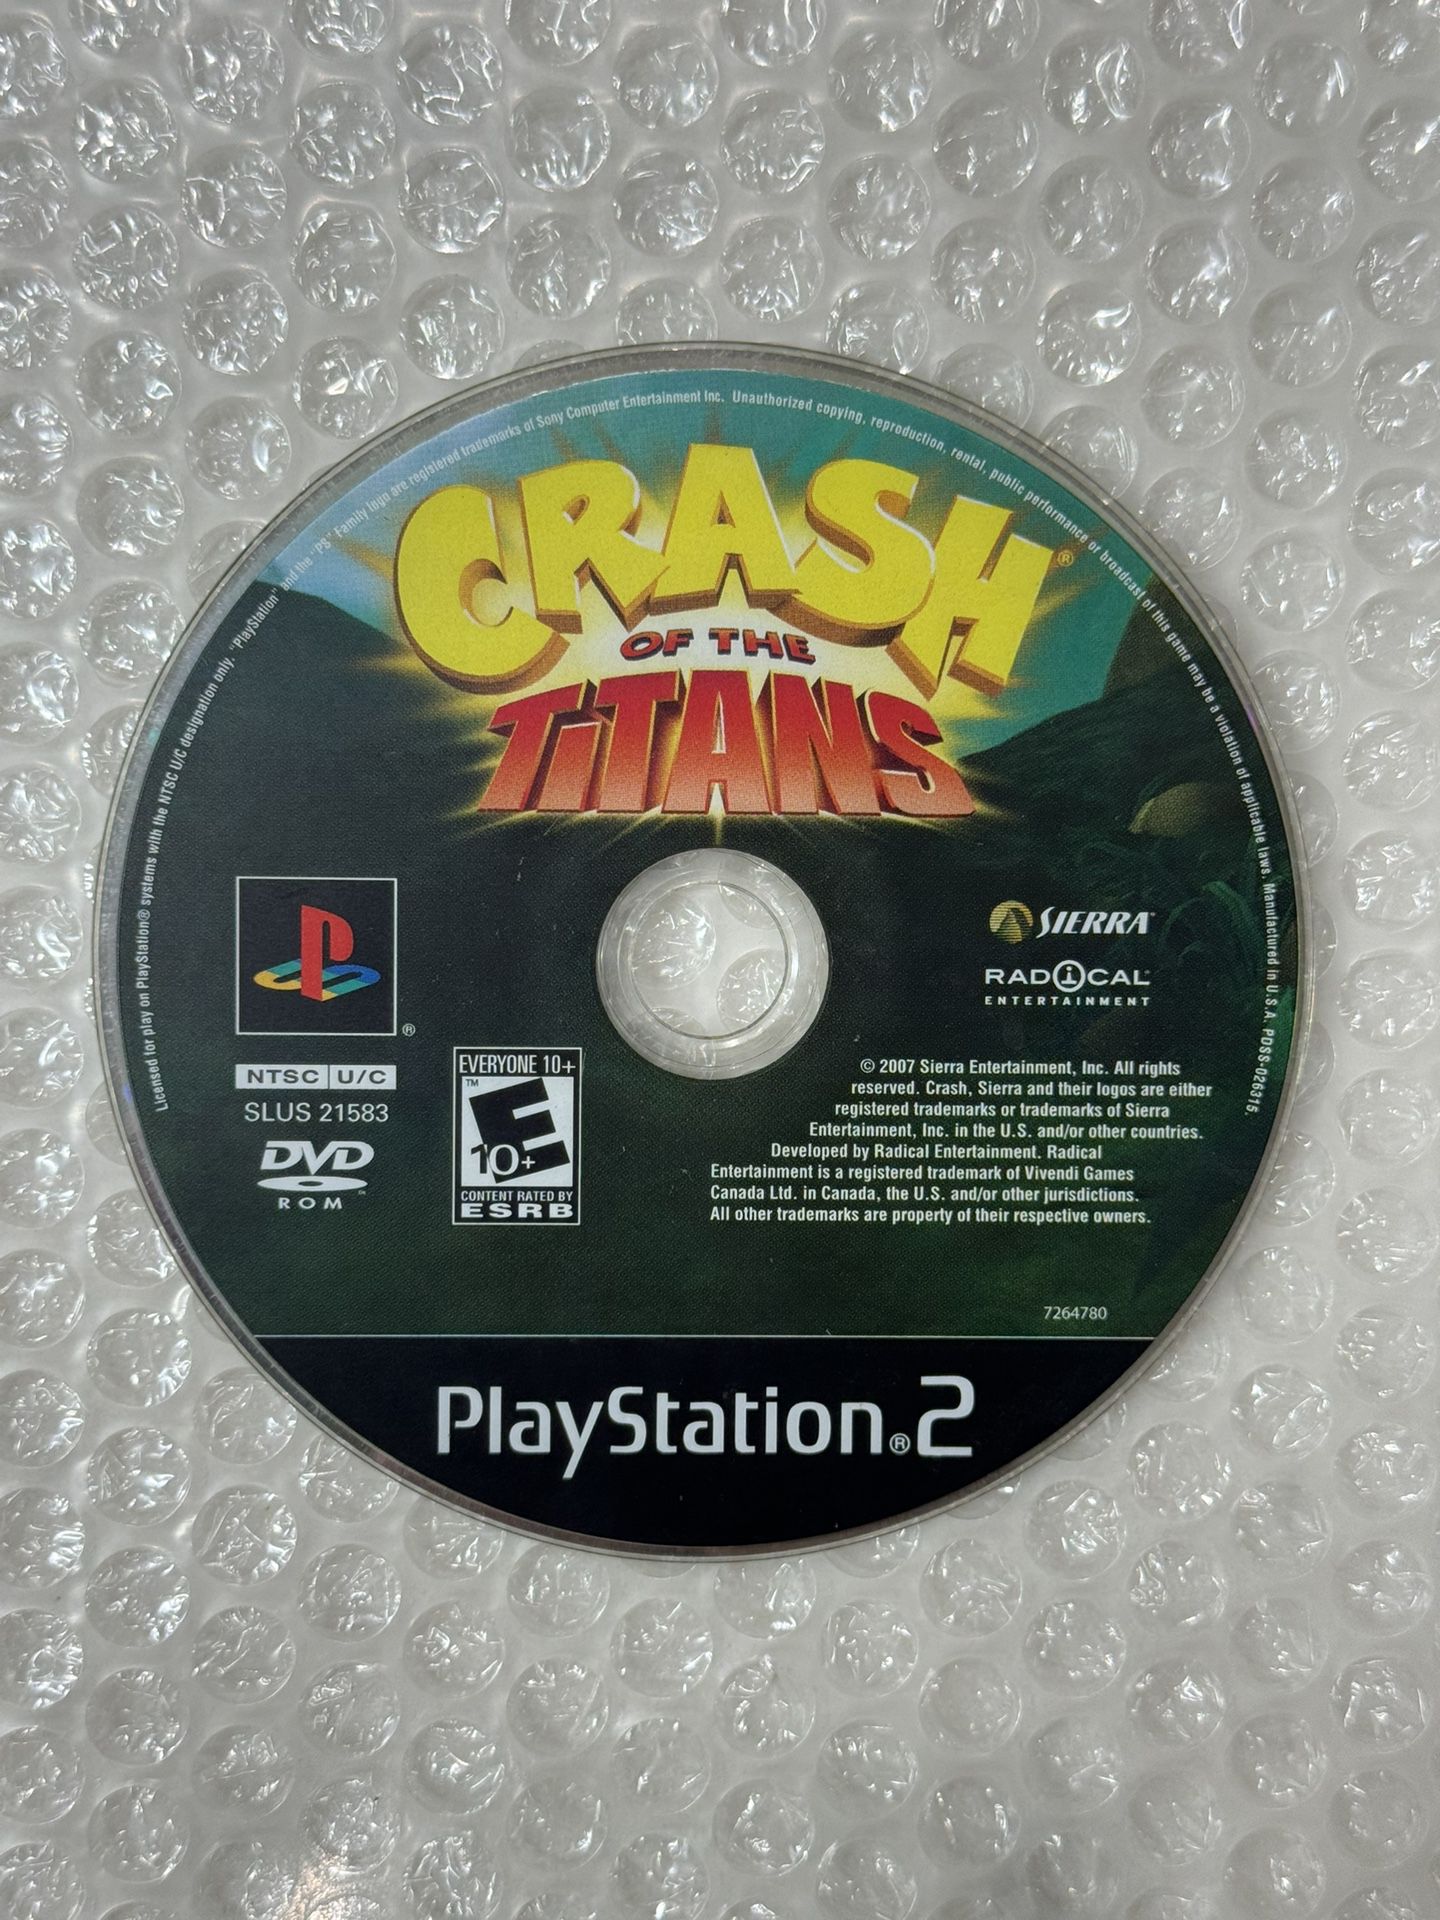 Crash of the Titans Scratch-Less for PlayStation 2 PS2